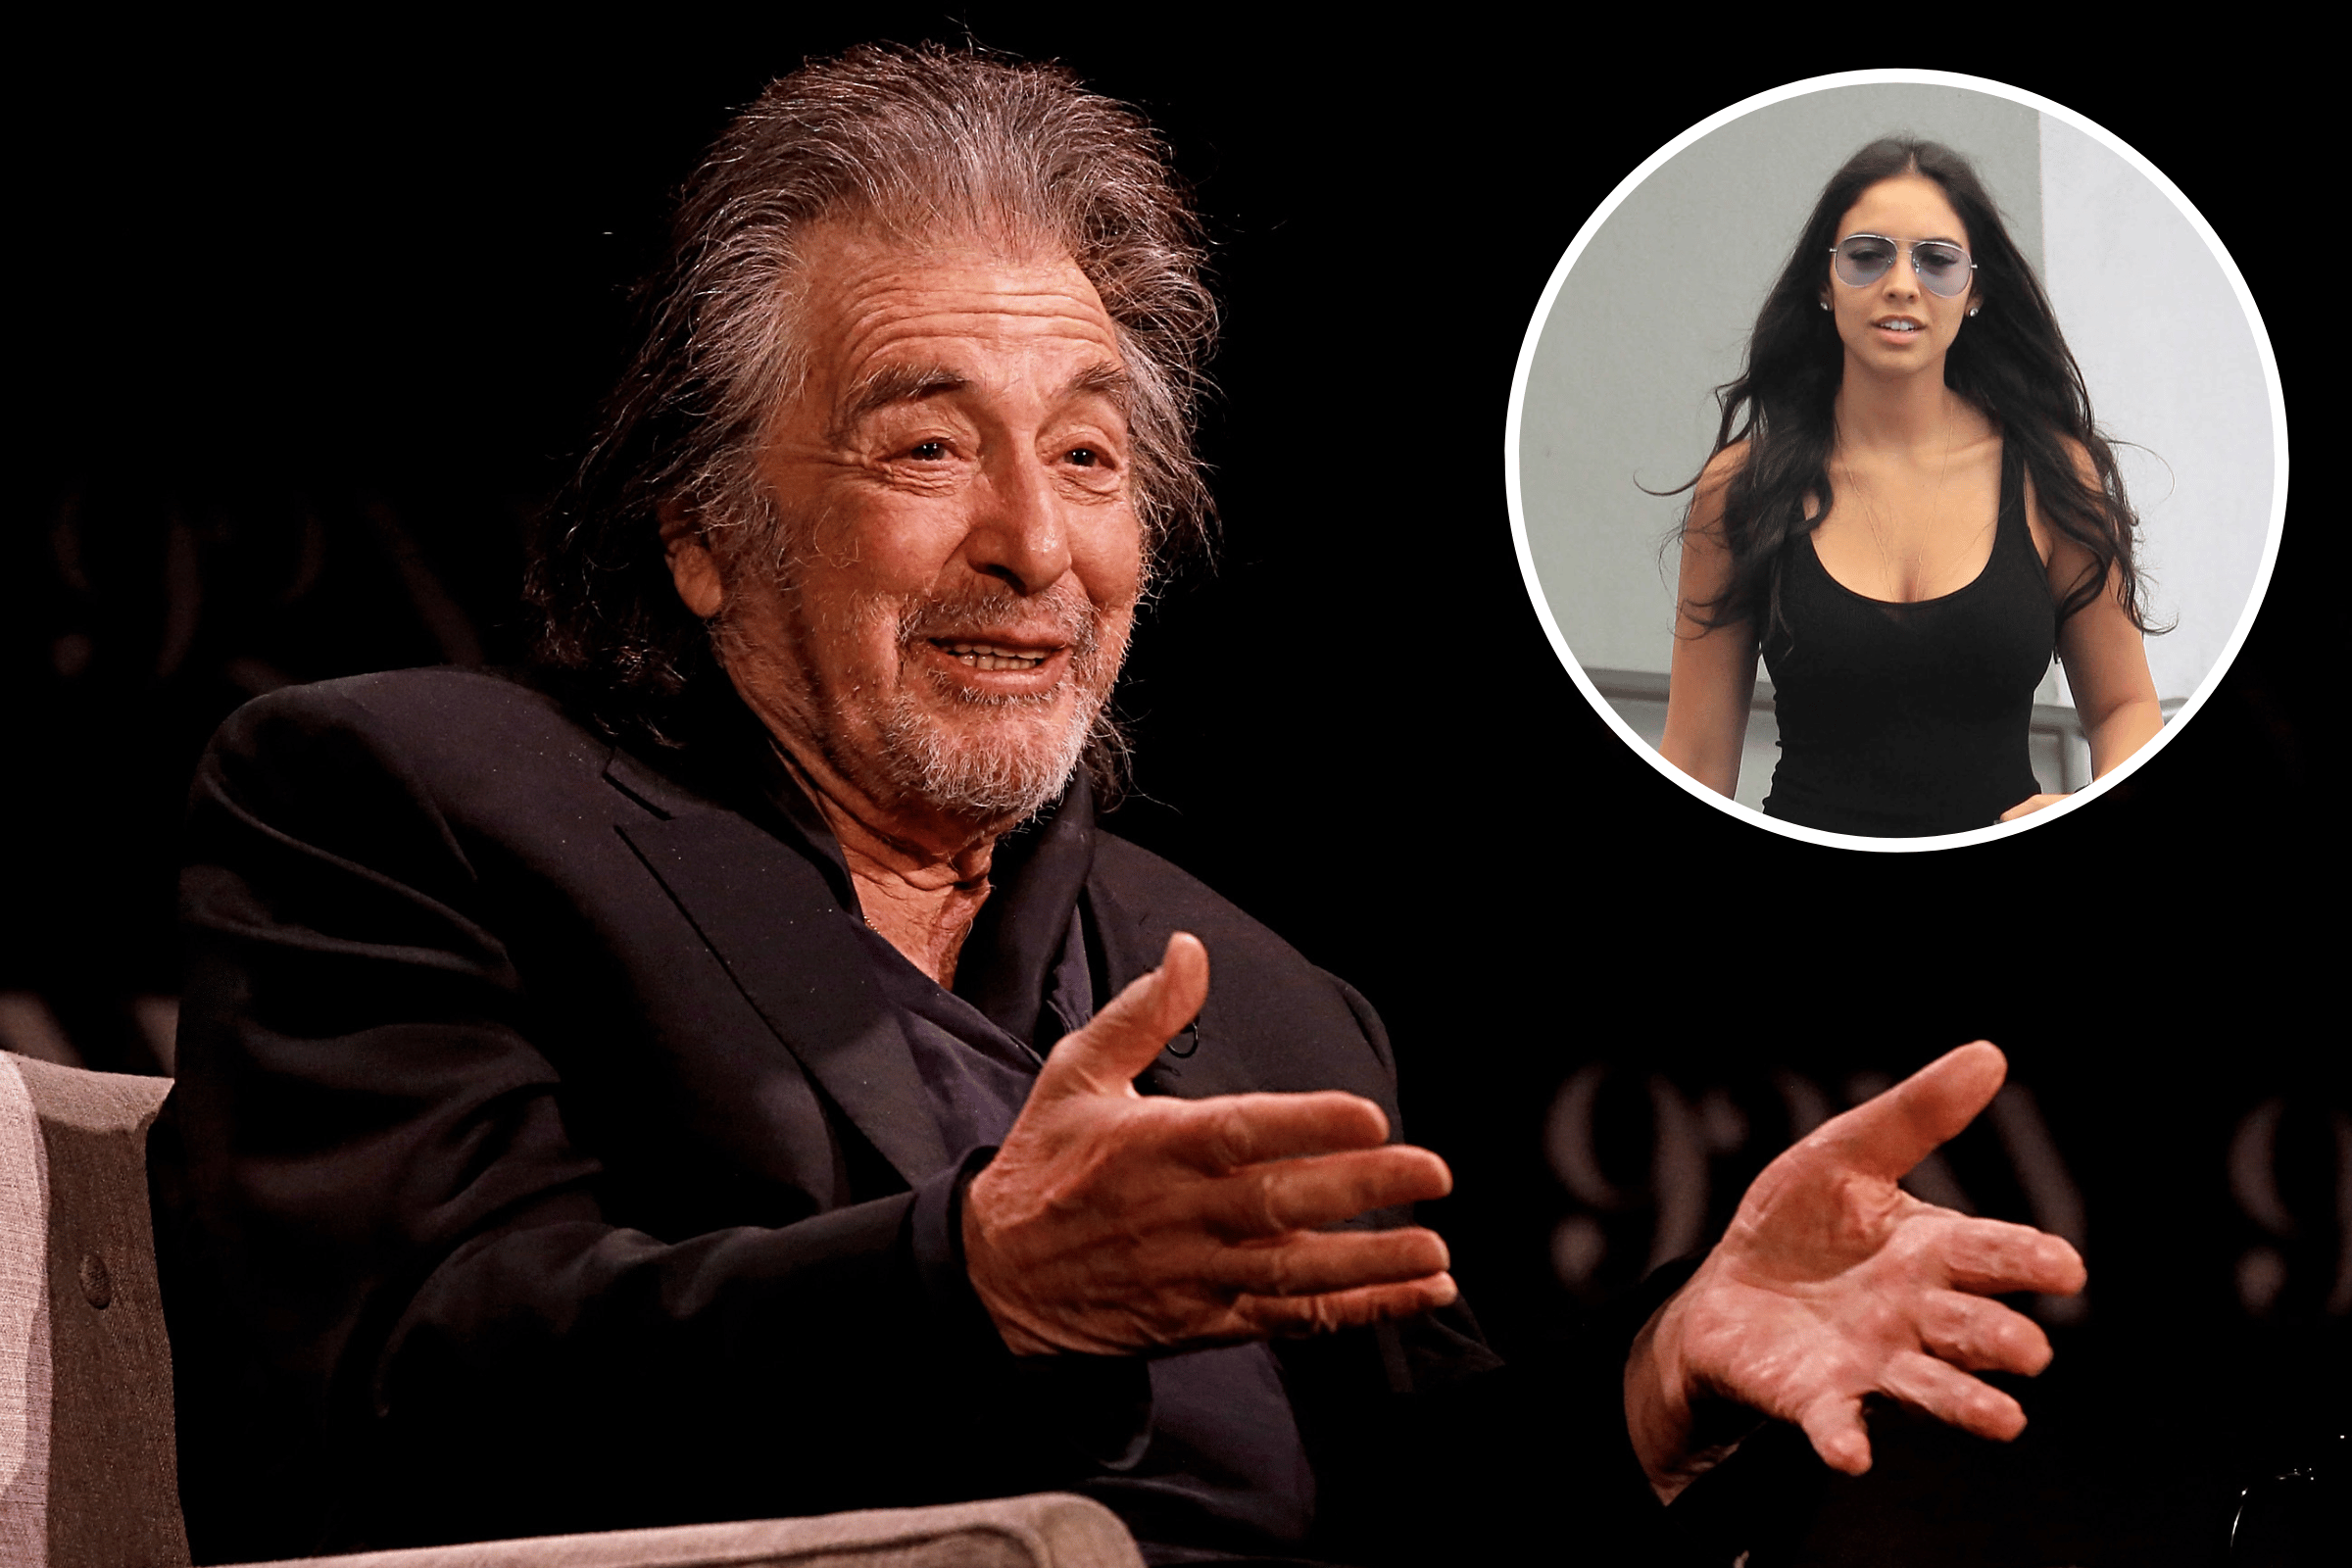 Al Pacino Expecting Fourth Child At 83 Sparks Wave of Memes, Jokes